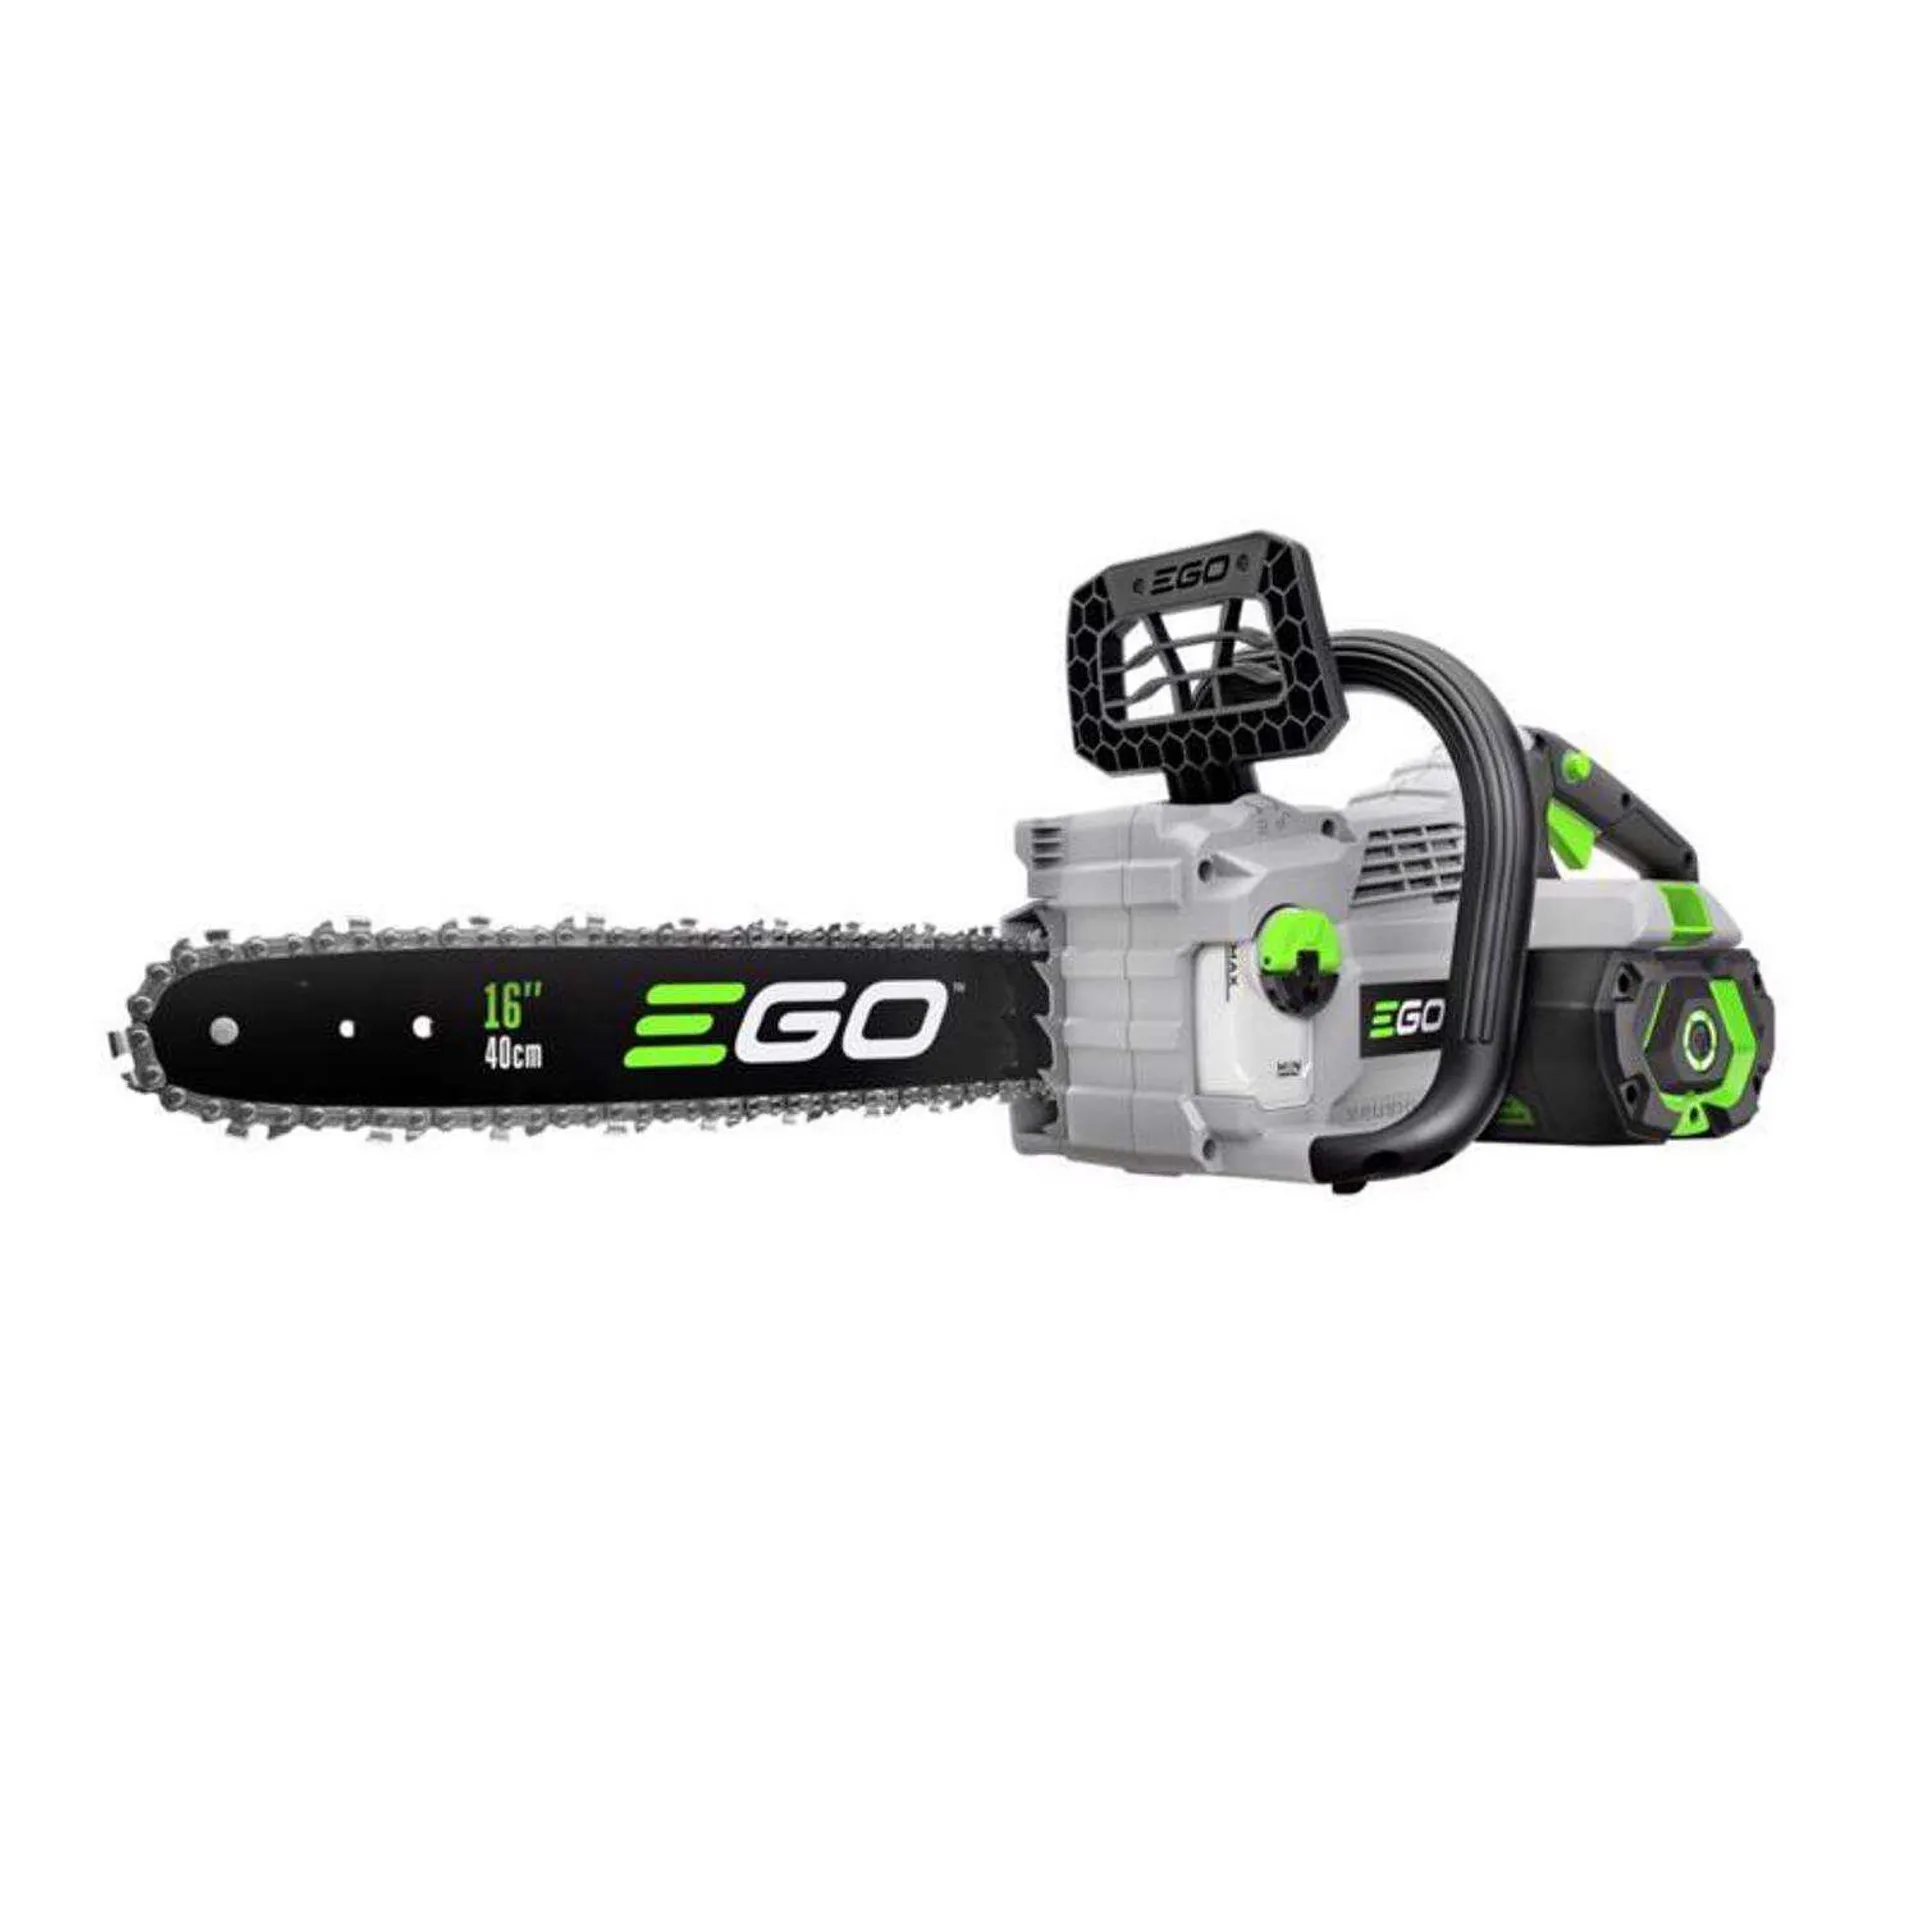 EGO Power+ CS1613 16 in. 56 V Battery Chainsaw Kit (Battery & Charger)